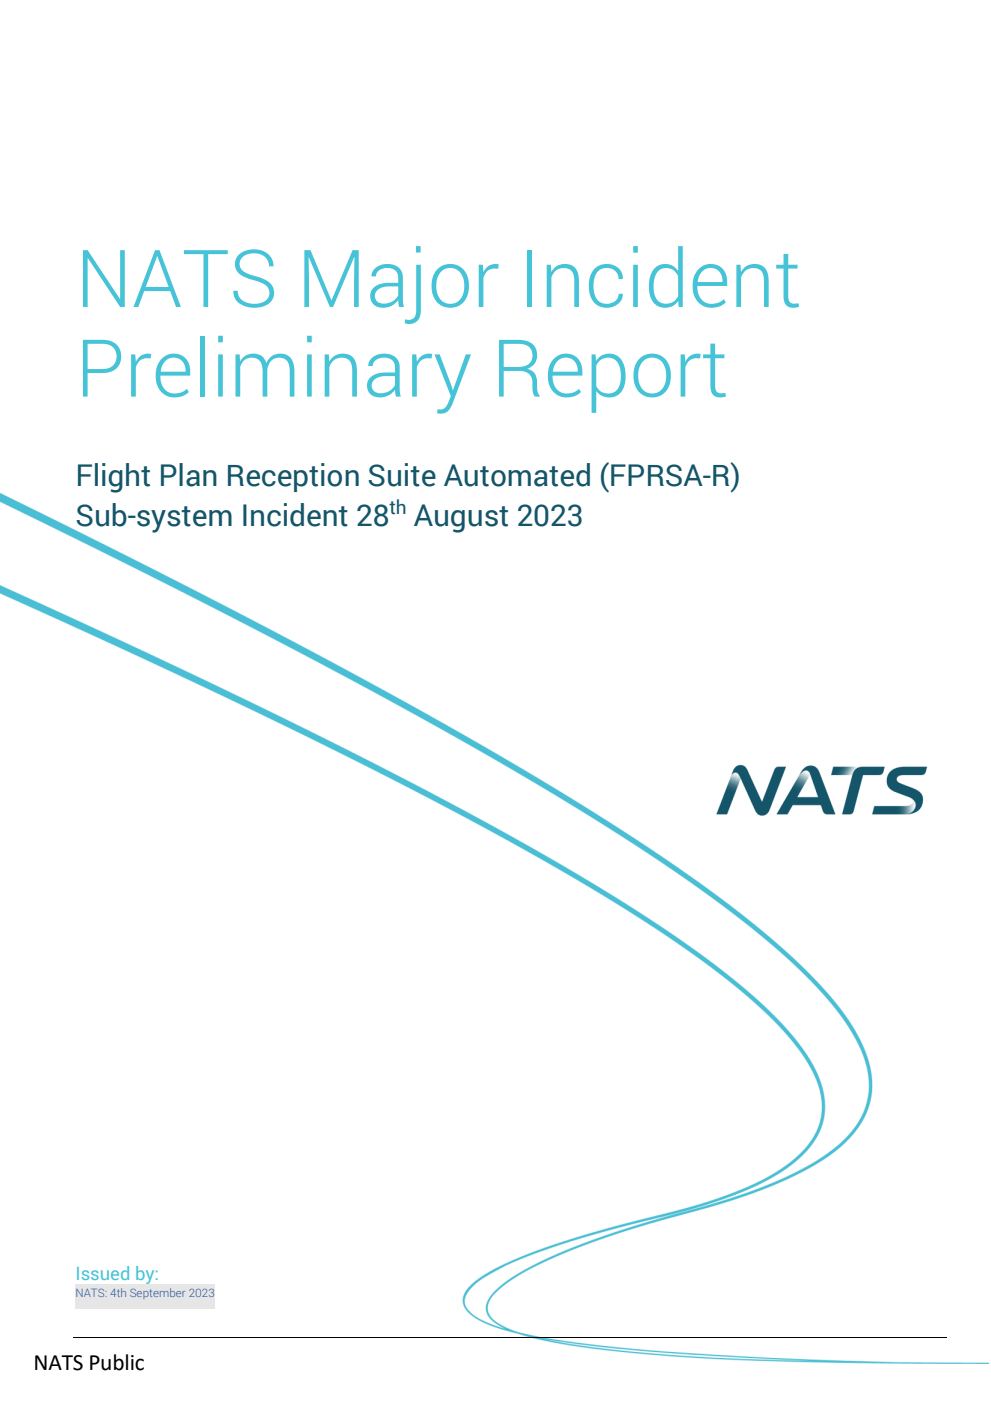 NATS Major Incident Preliminary Report. Flight Plan Reception Suite Automated (FPRSA-R) Sub-system Incident 28th August 2023